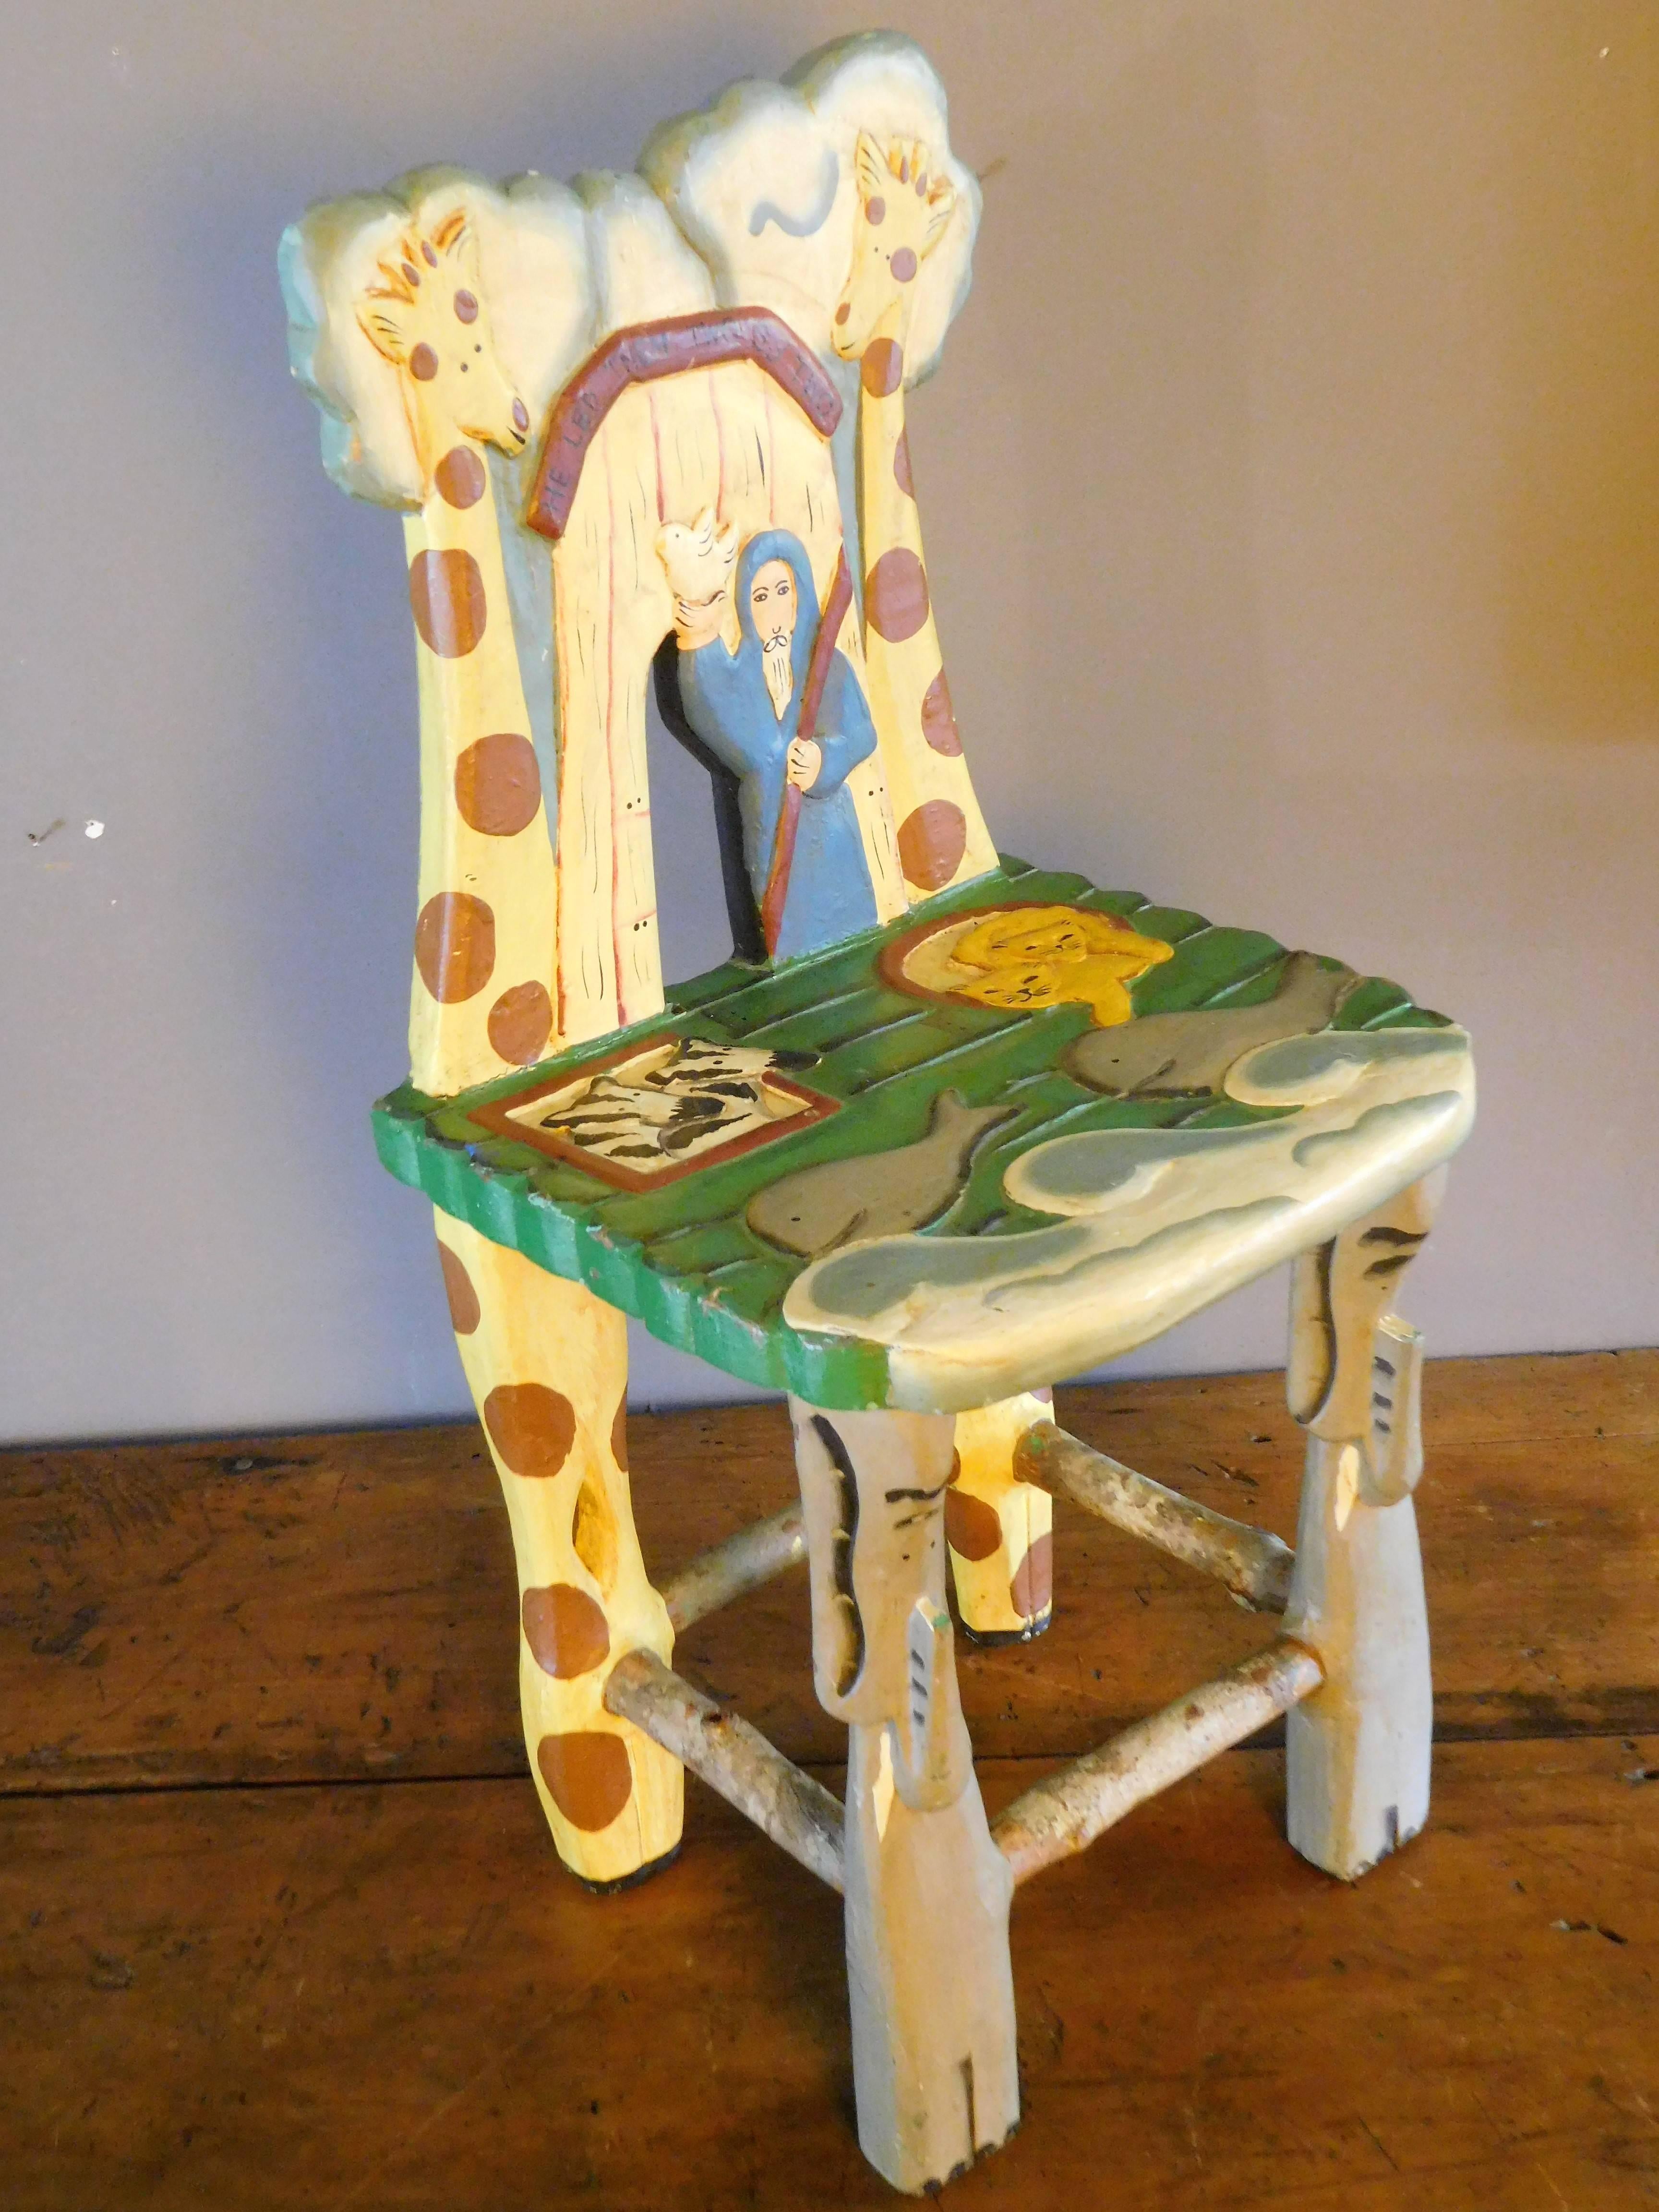 This toddler's chair is hand-carved and hand-painted. It depicts the Biblical story of Noah's Ark. The artist shows rain clouds over the entrance to the ark where Noah stands with a dove, as he 